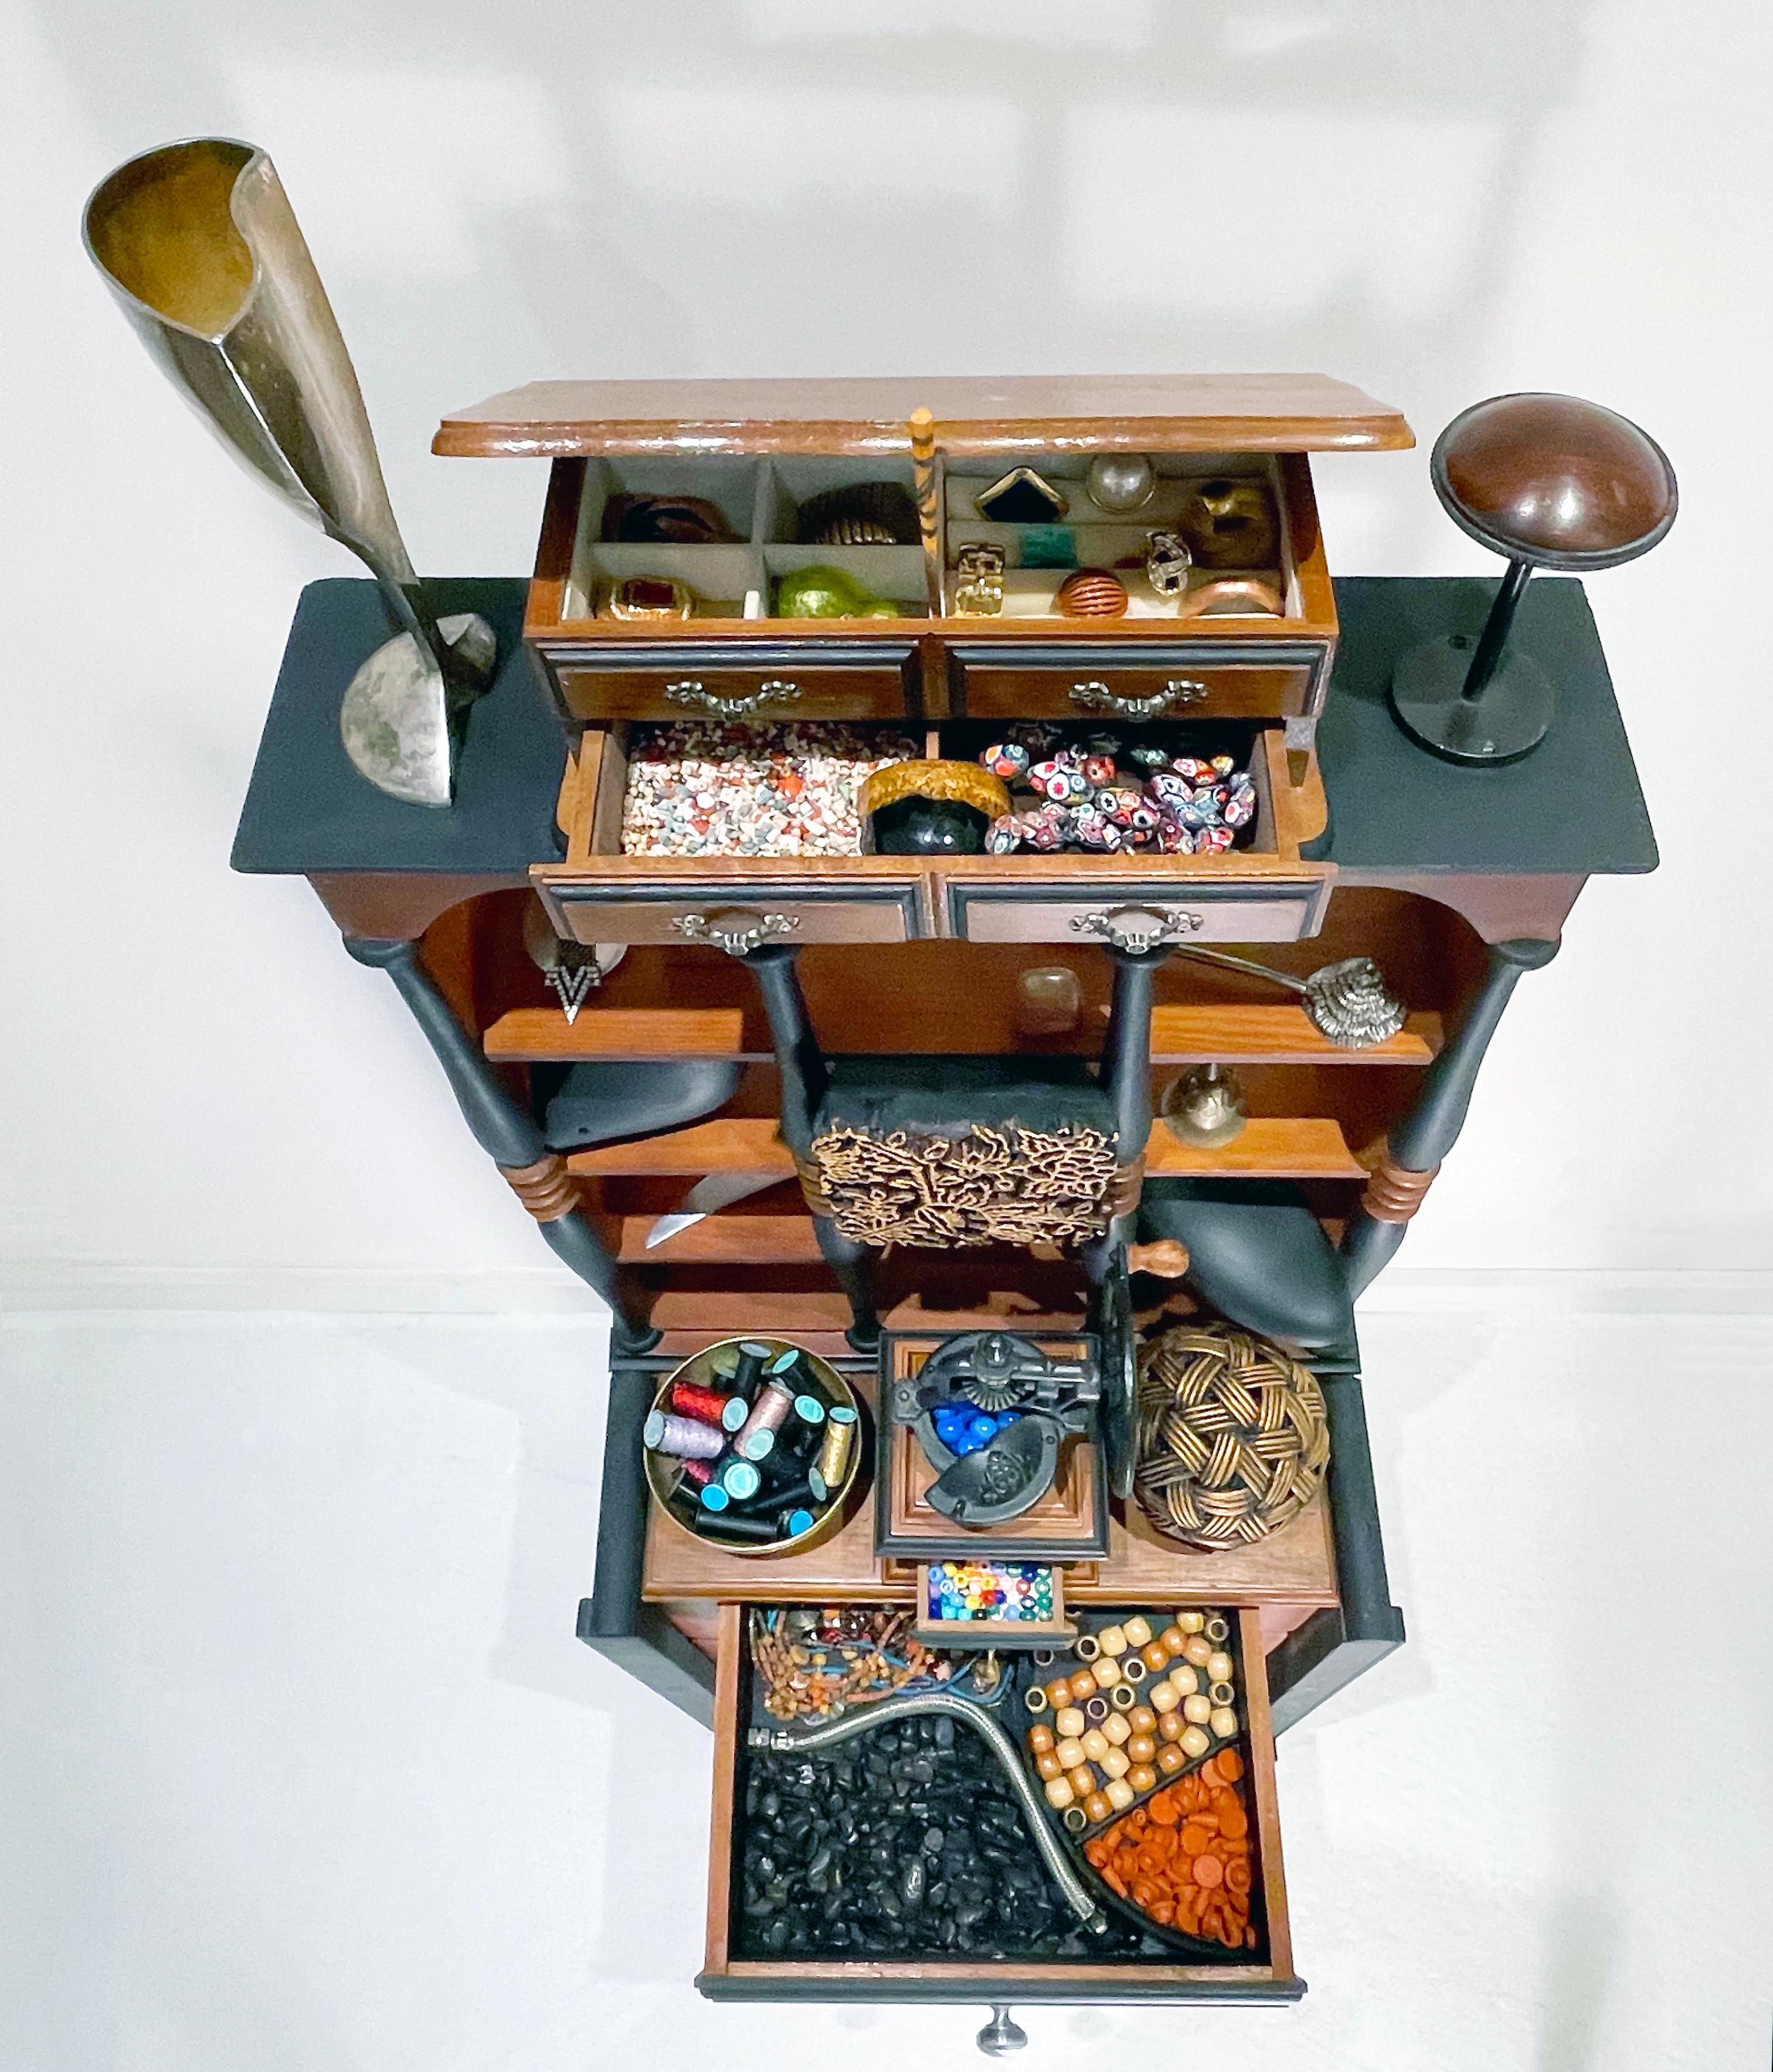 This work from Linda Stein's Displacement From Home series draws from the tradition of wunderkammer/cabinets of curiosities to highlight the global displacement and traumatic memory of migrants and refugees around the world. 

Works from this series